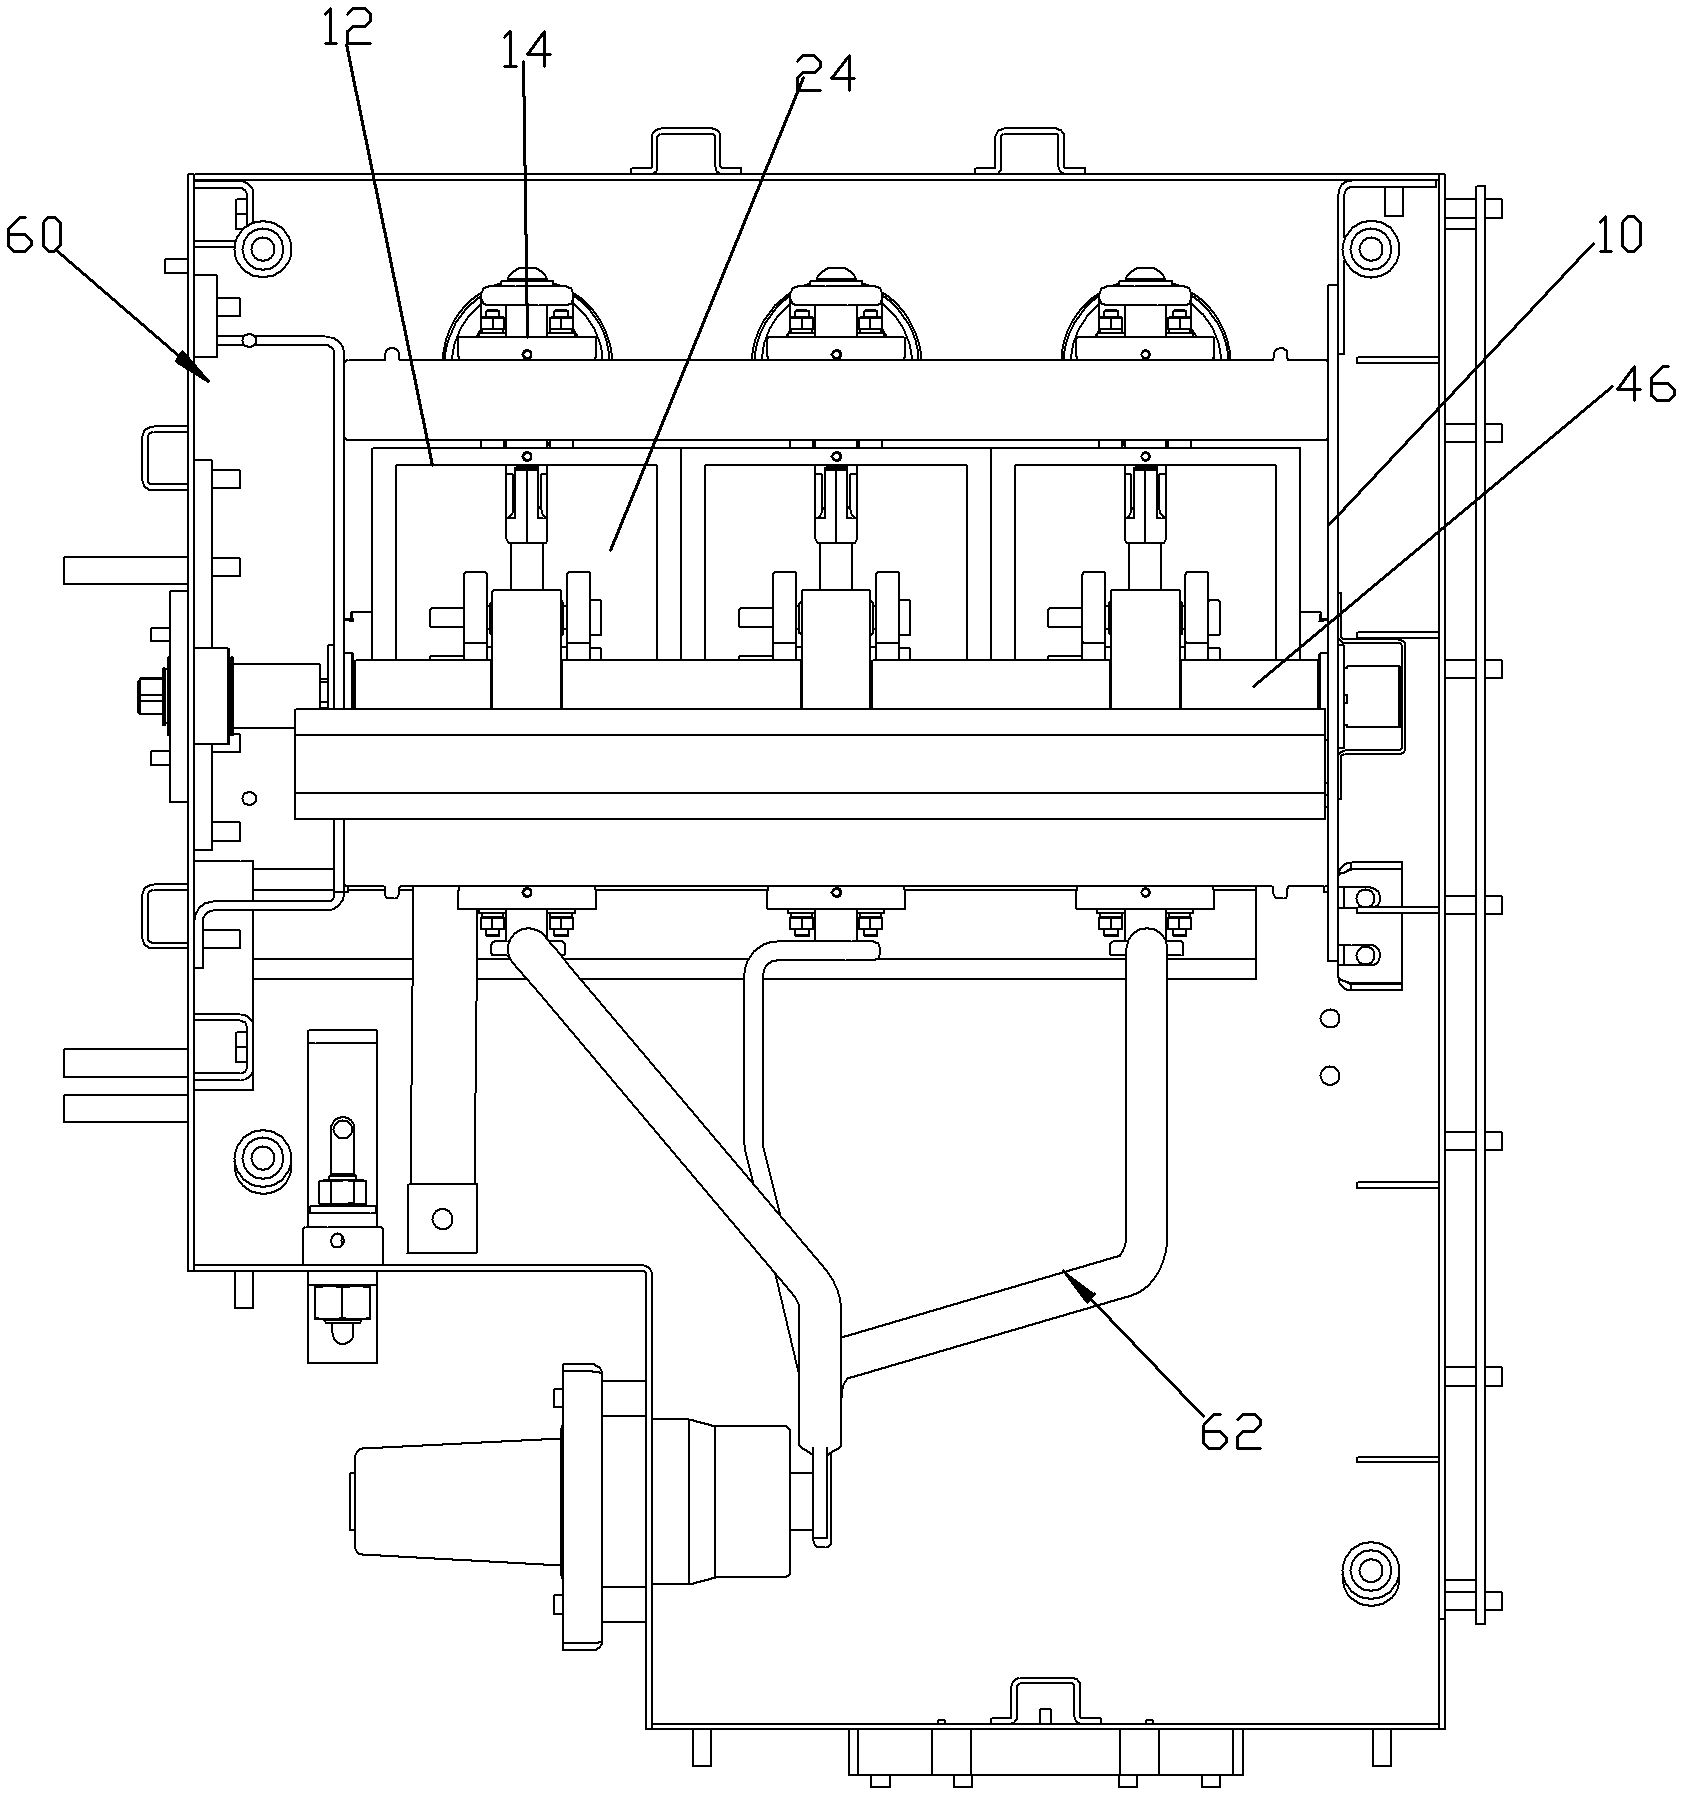 Arc-extinguishing load switch and switch equipment